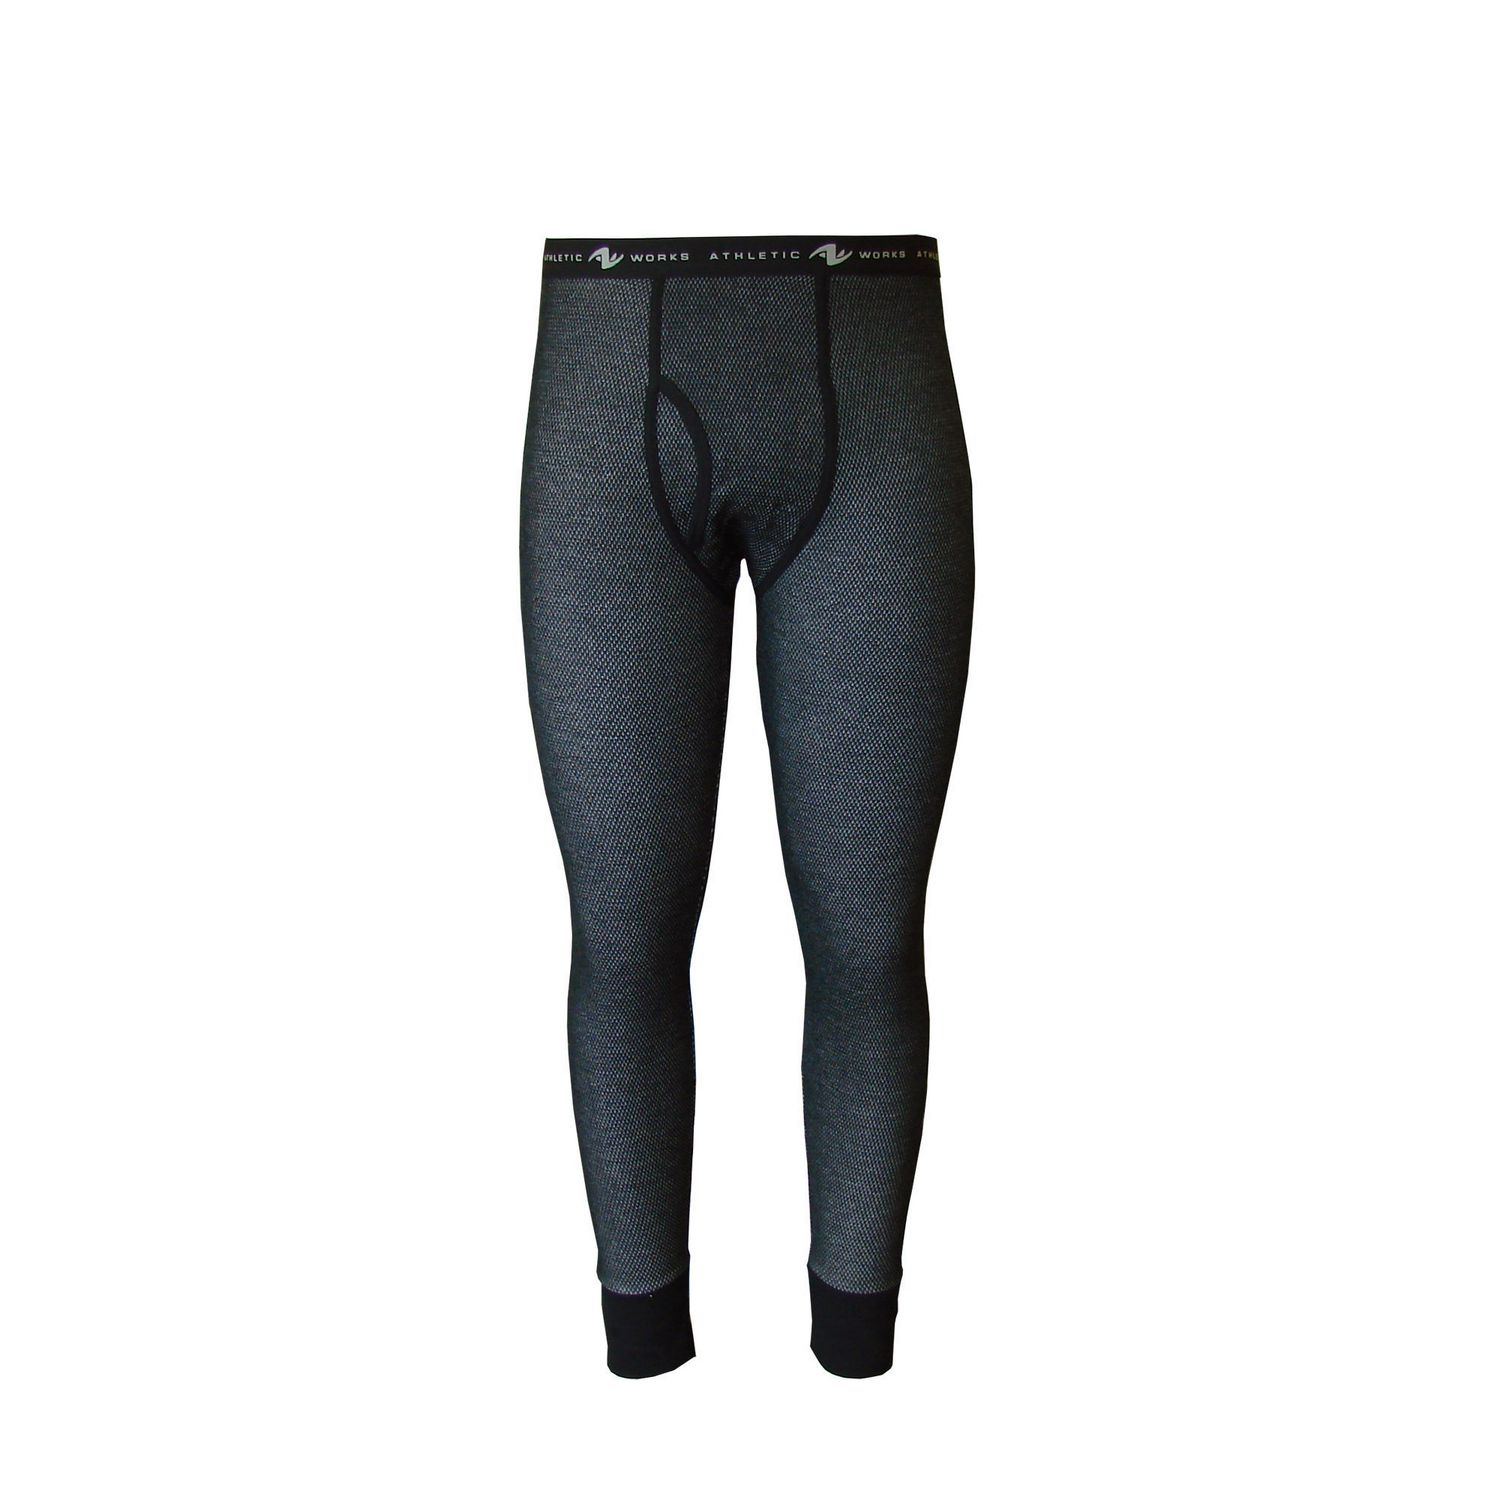 Athletic Works Men's Lightweight Thermal Pant | Walmart Canada